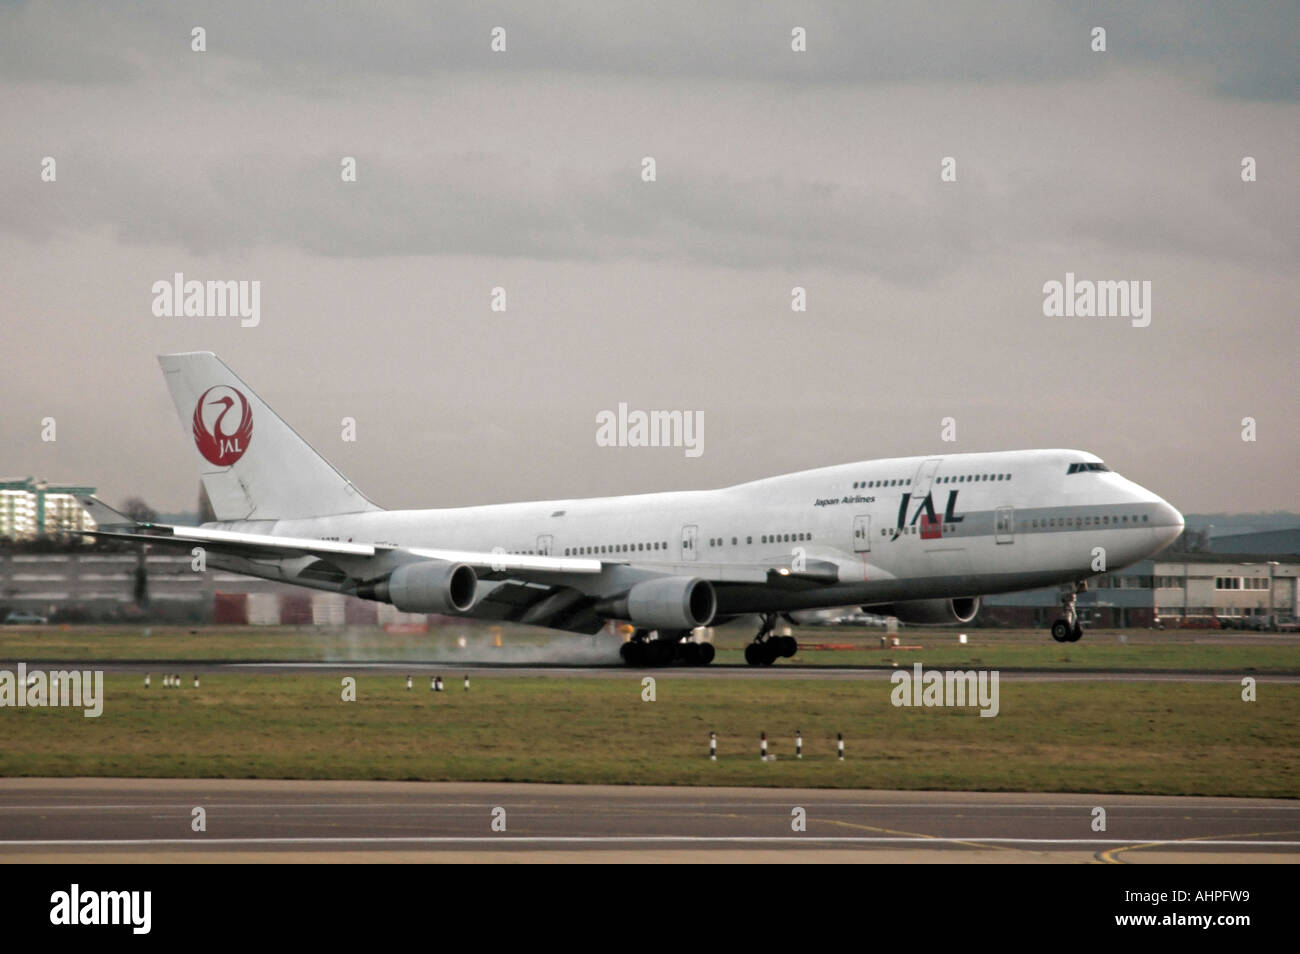 Horizontal view of a Japanese Airline (JAL) Boeing 747 at the moment of impact landing on a runway. Stock Photo